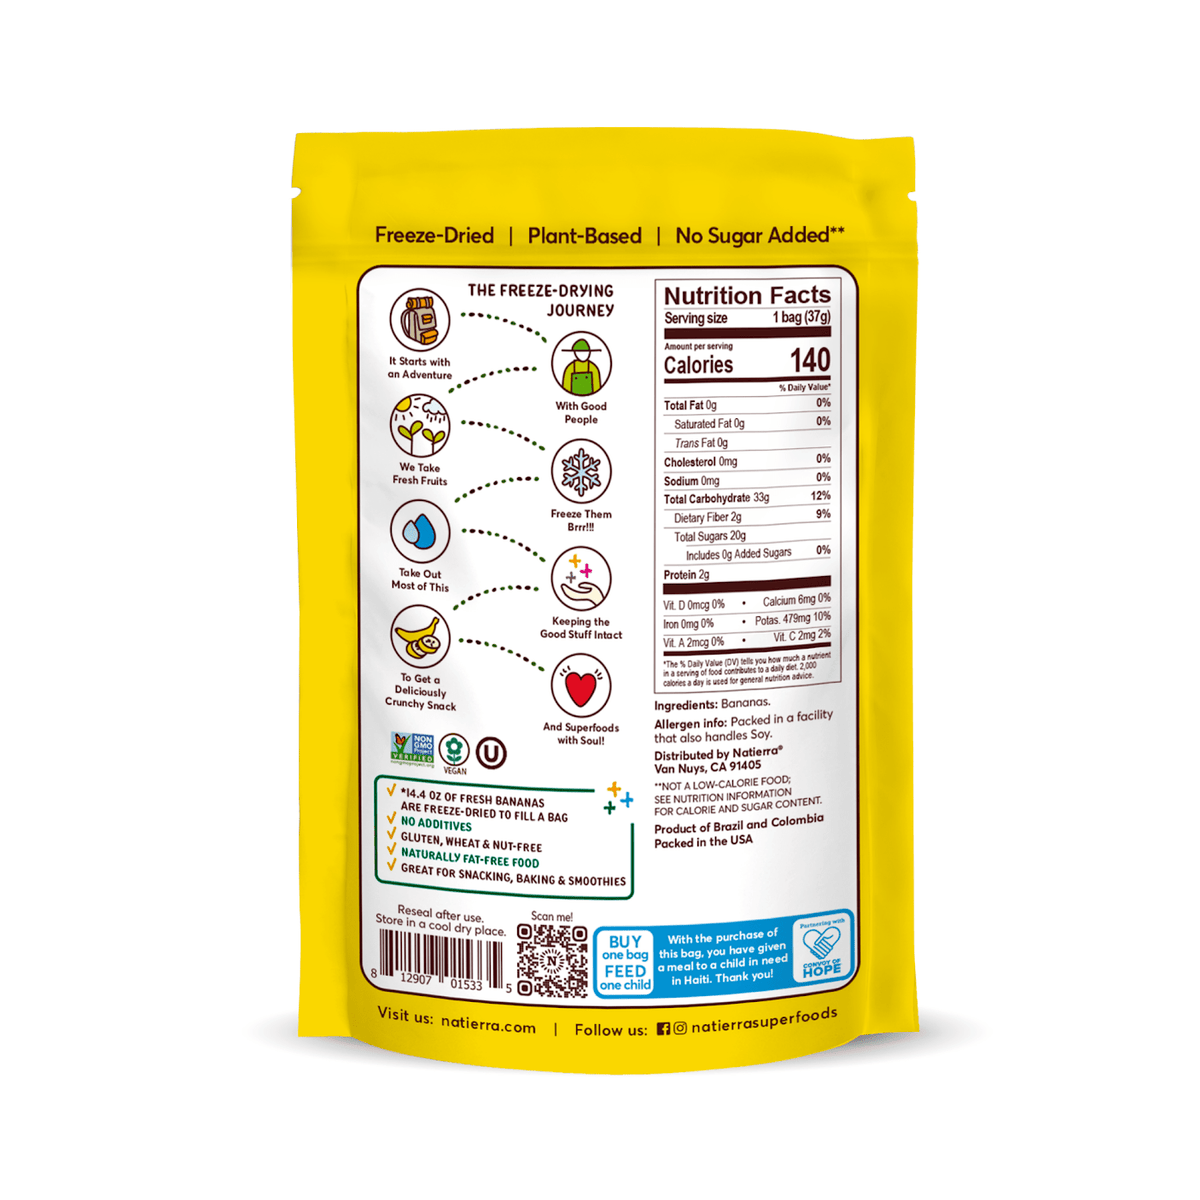 Natierra Freeze-Dried Bananas bag with Nutrition facts, journey and main product claims